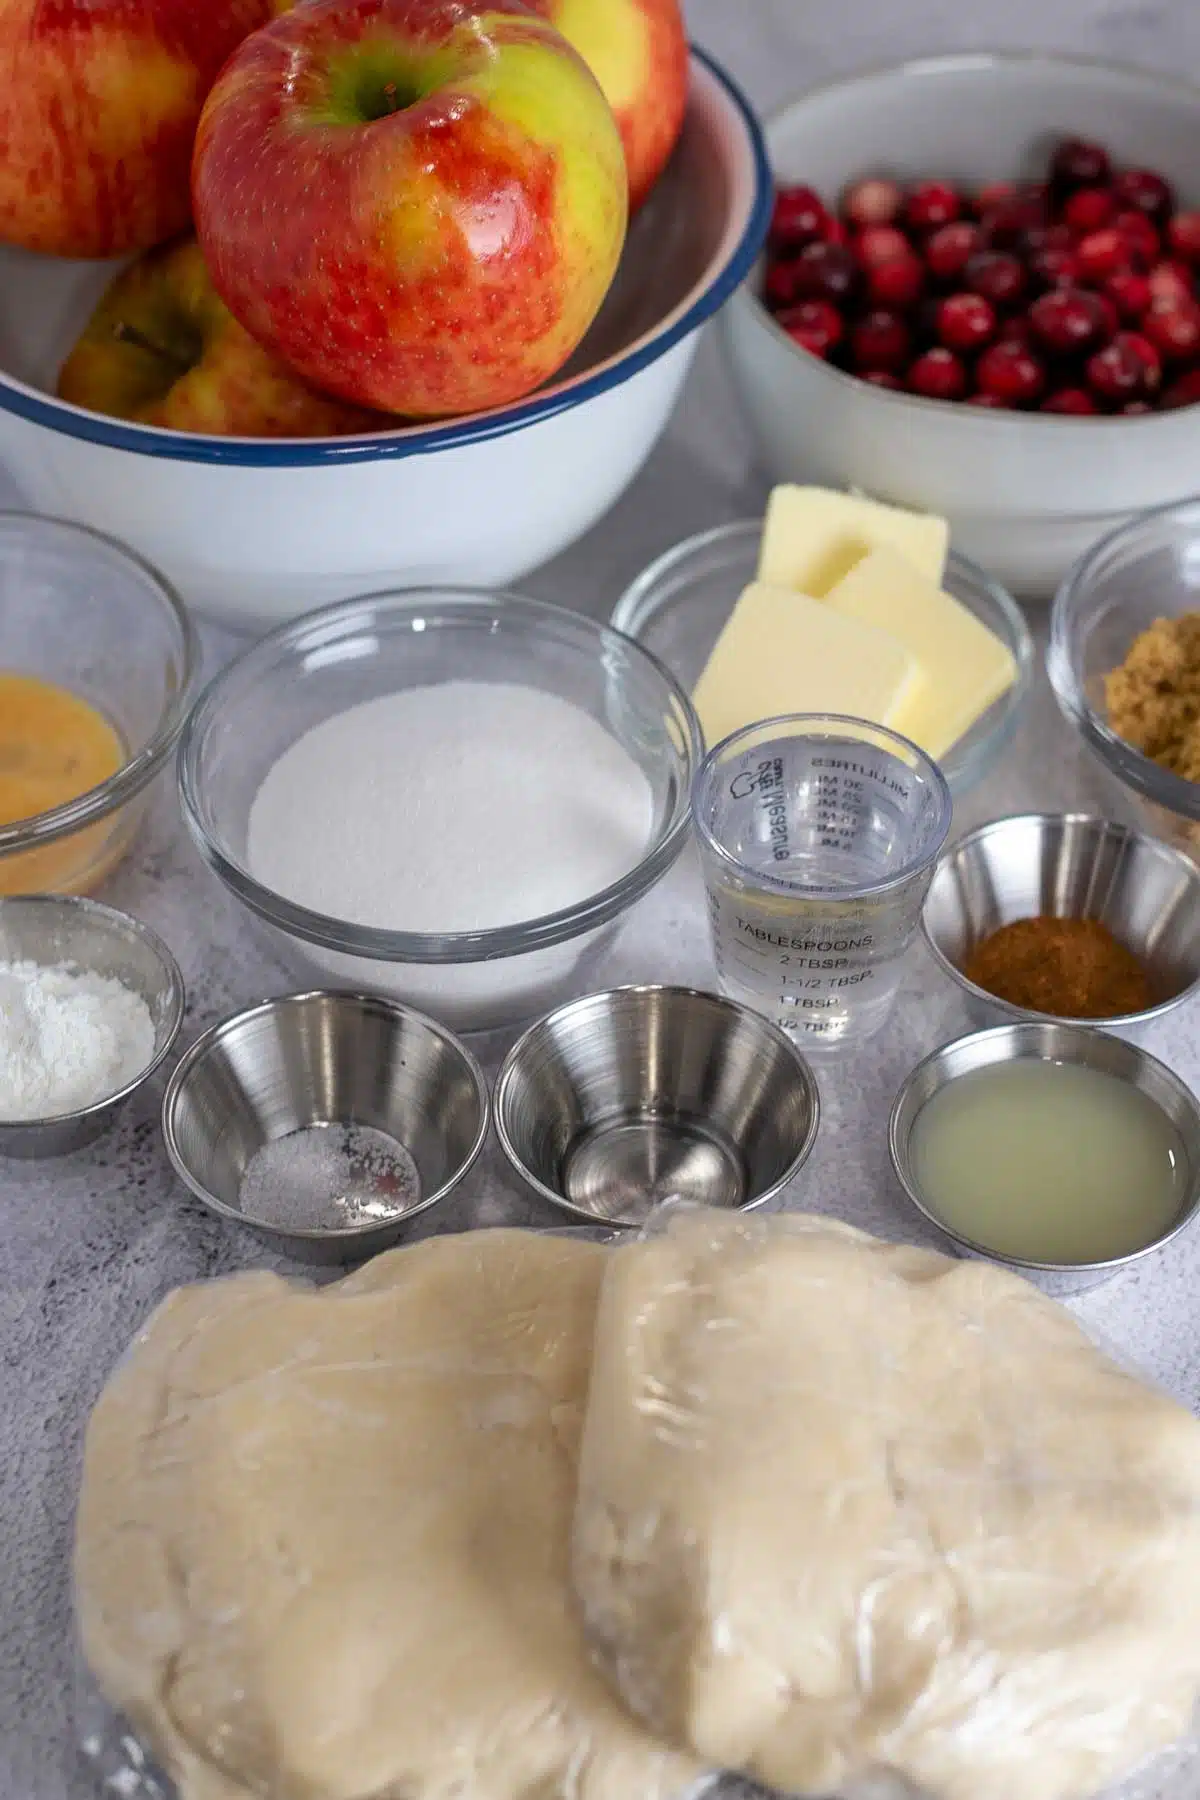 Tall image showing apple and cranberry pie ingredients.